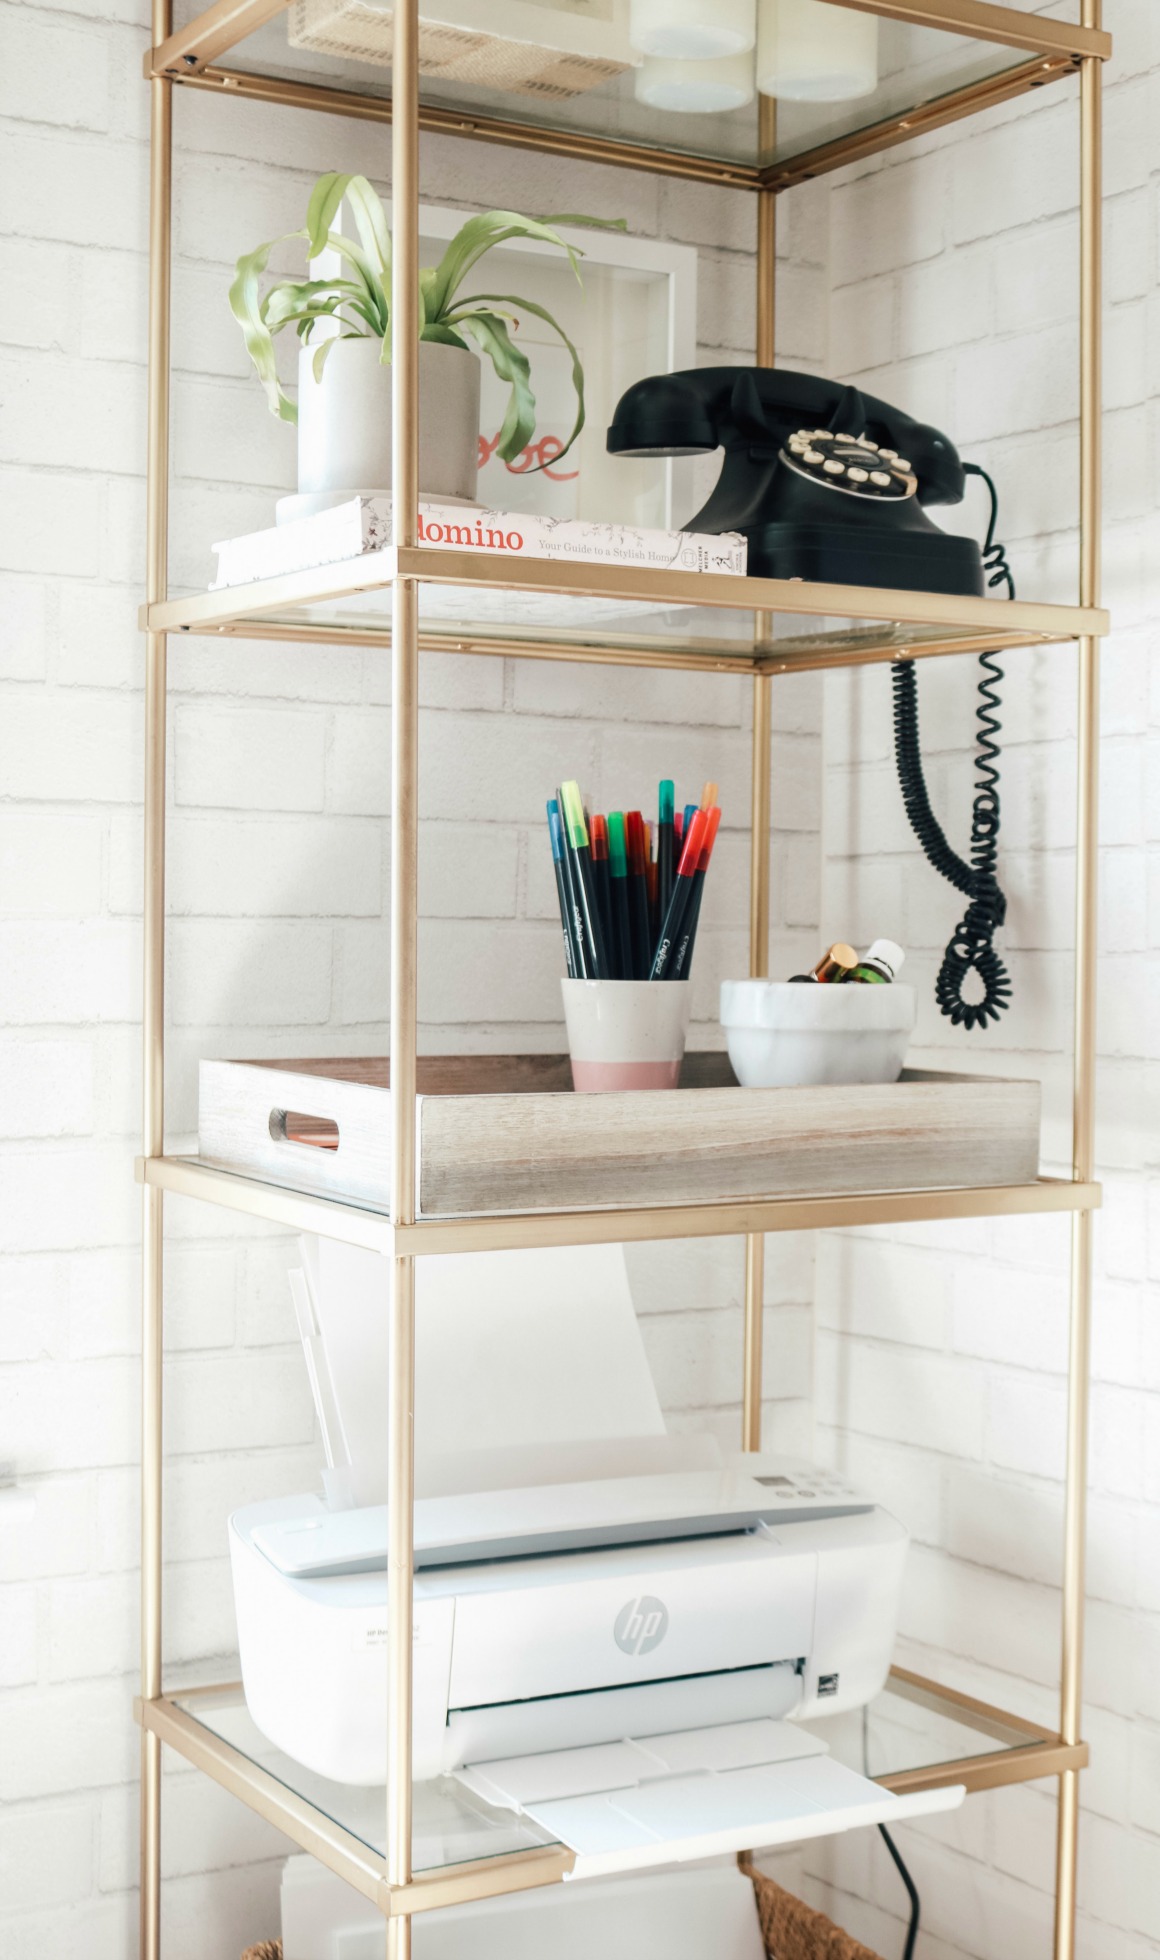 10 Must Haves for Every Work Space